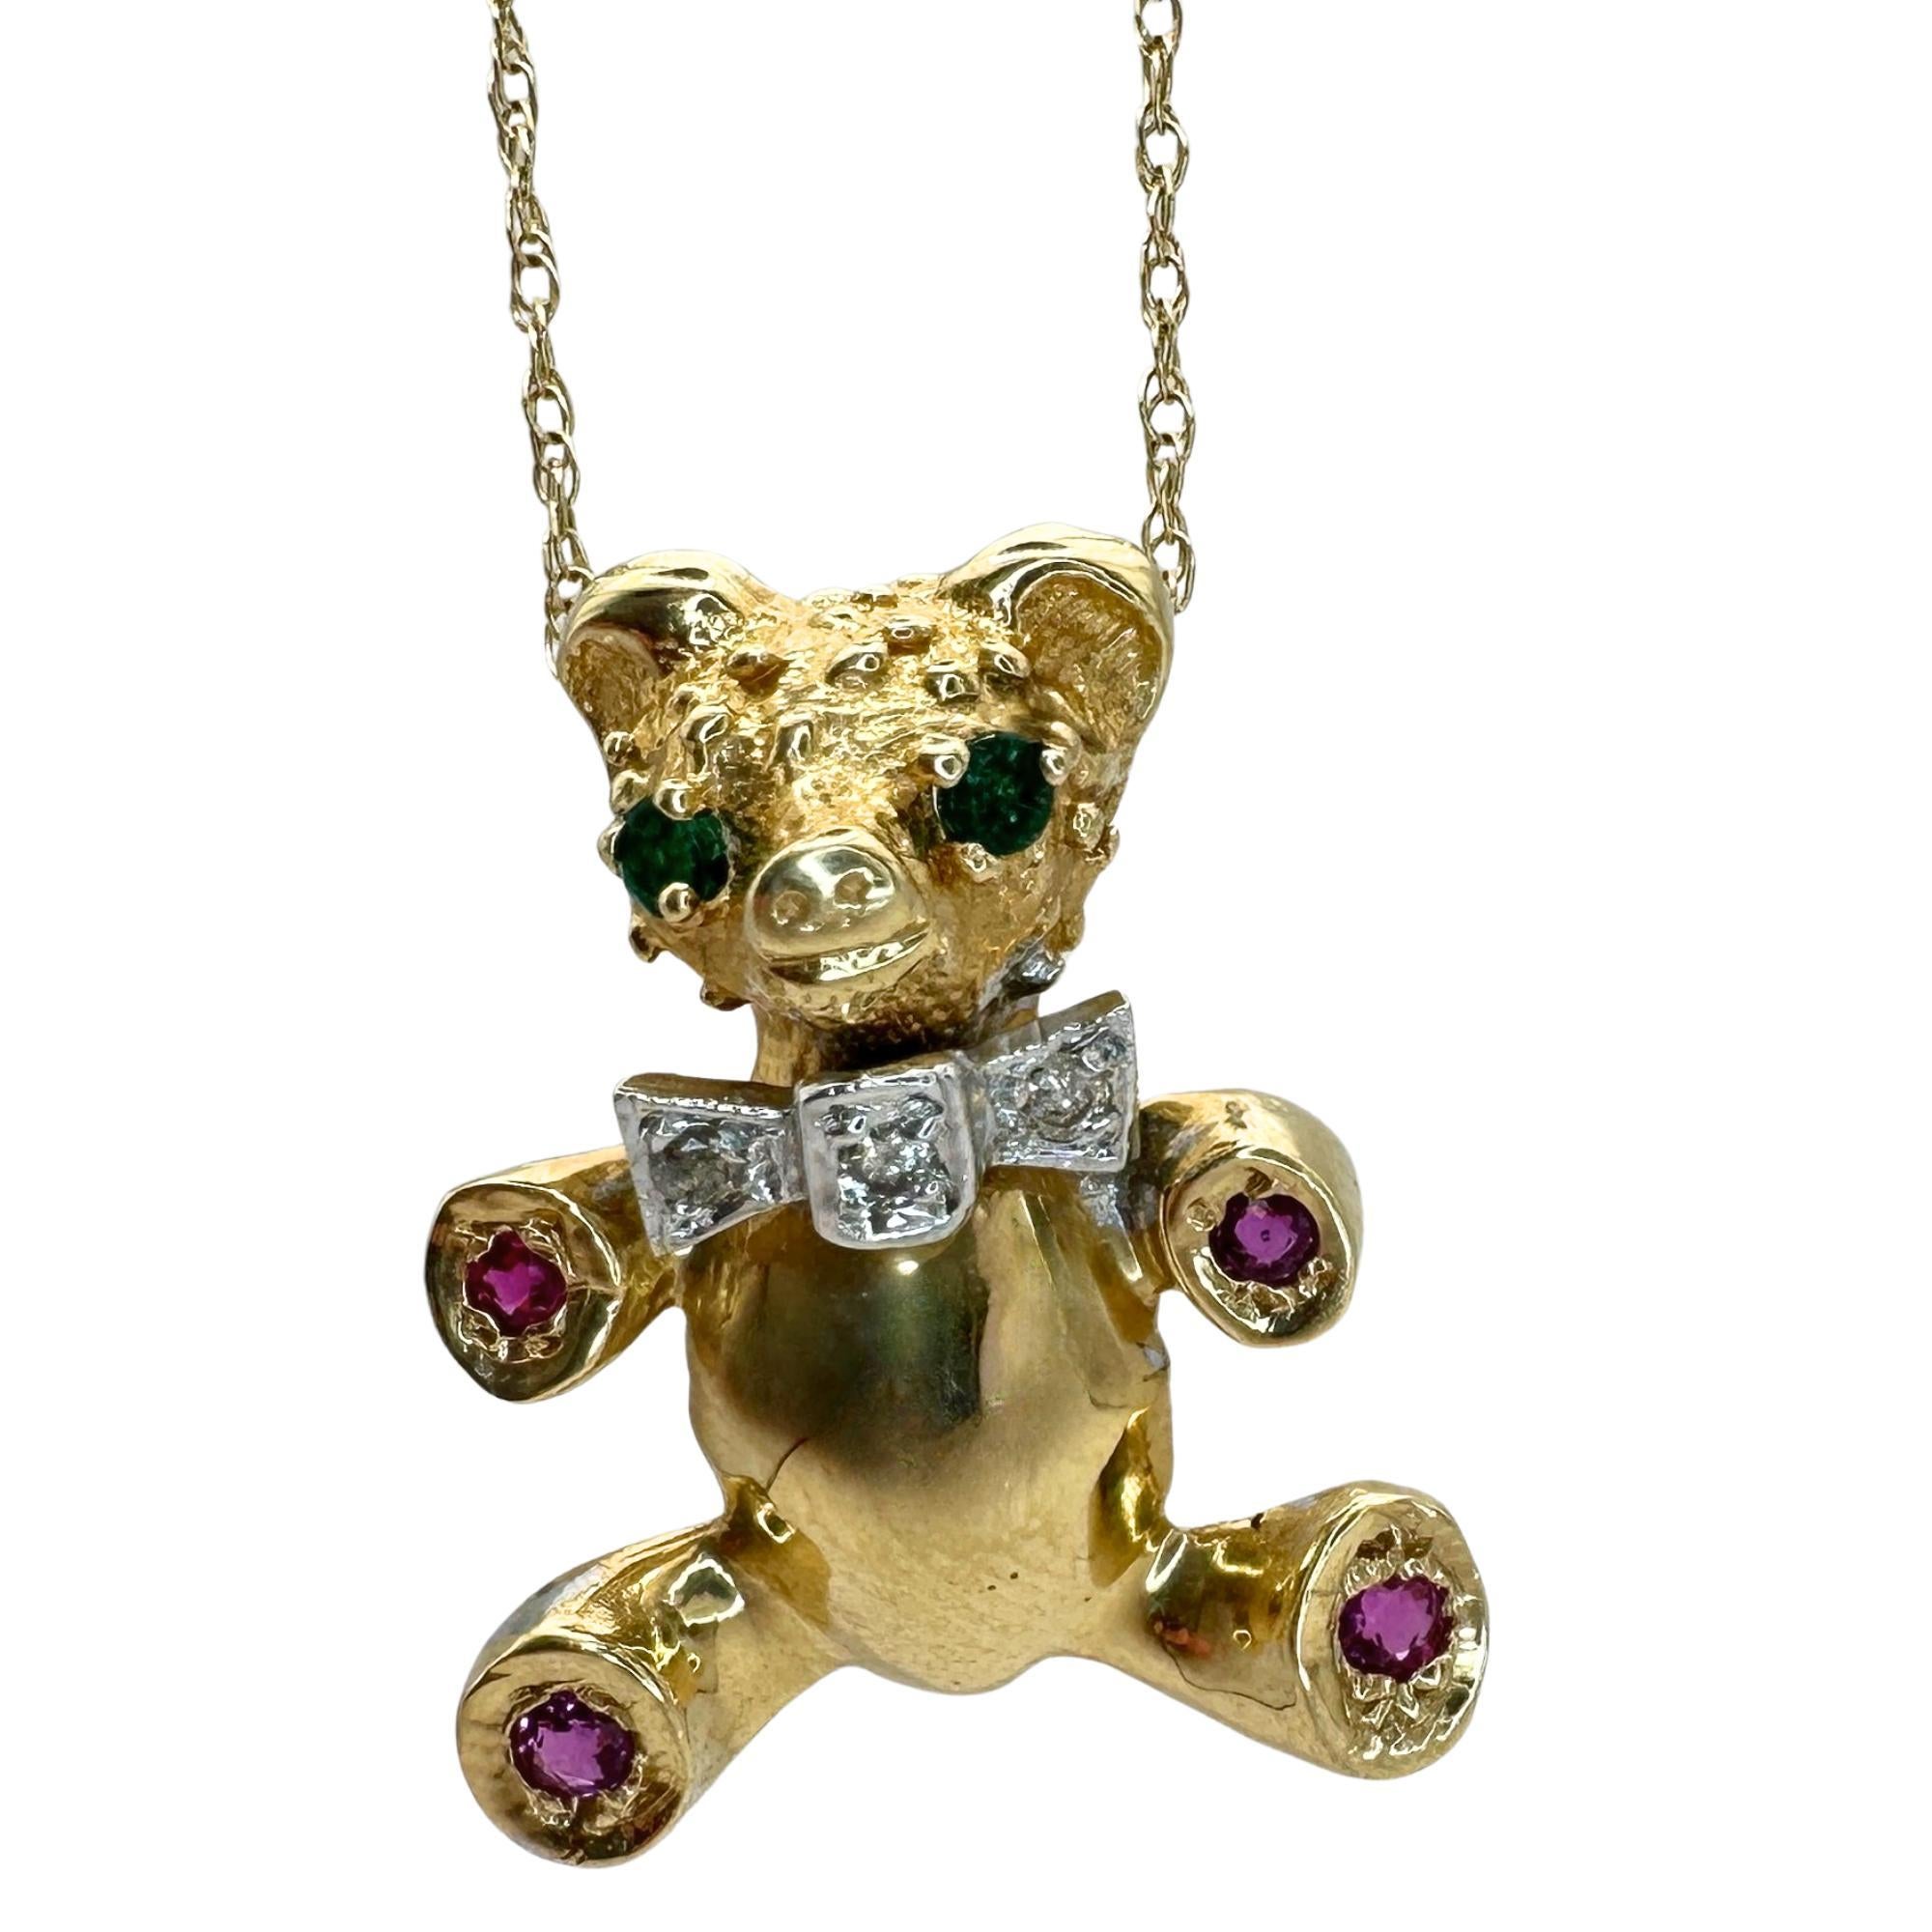 Add a touch of playful elegance with this stunning 14k 1980's Diamond, Emerald and Ruby Teddy Bear Pendant with Chain. The beautifully crafted pendant features 3.25 carats of sparkling diamonds, emeralds, and rubies, set in 14k yellow gold. With a